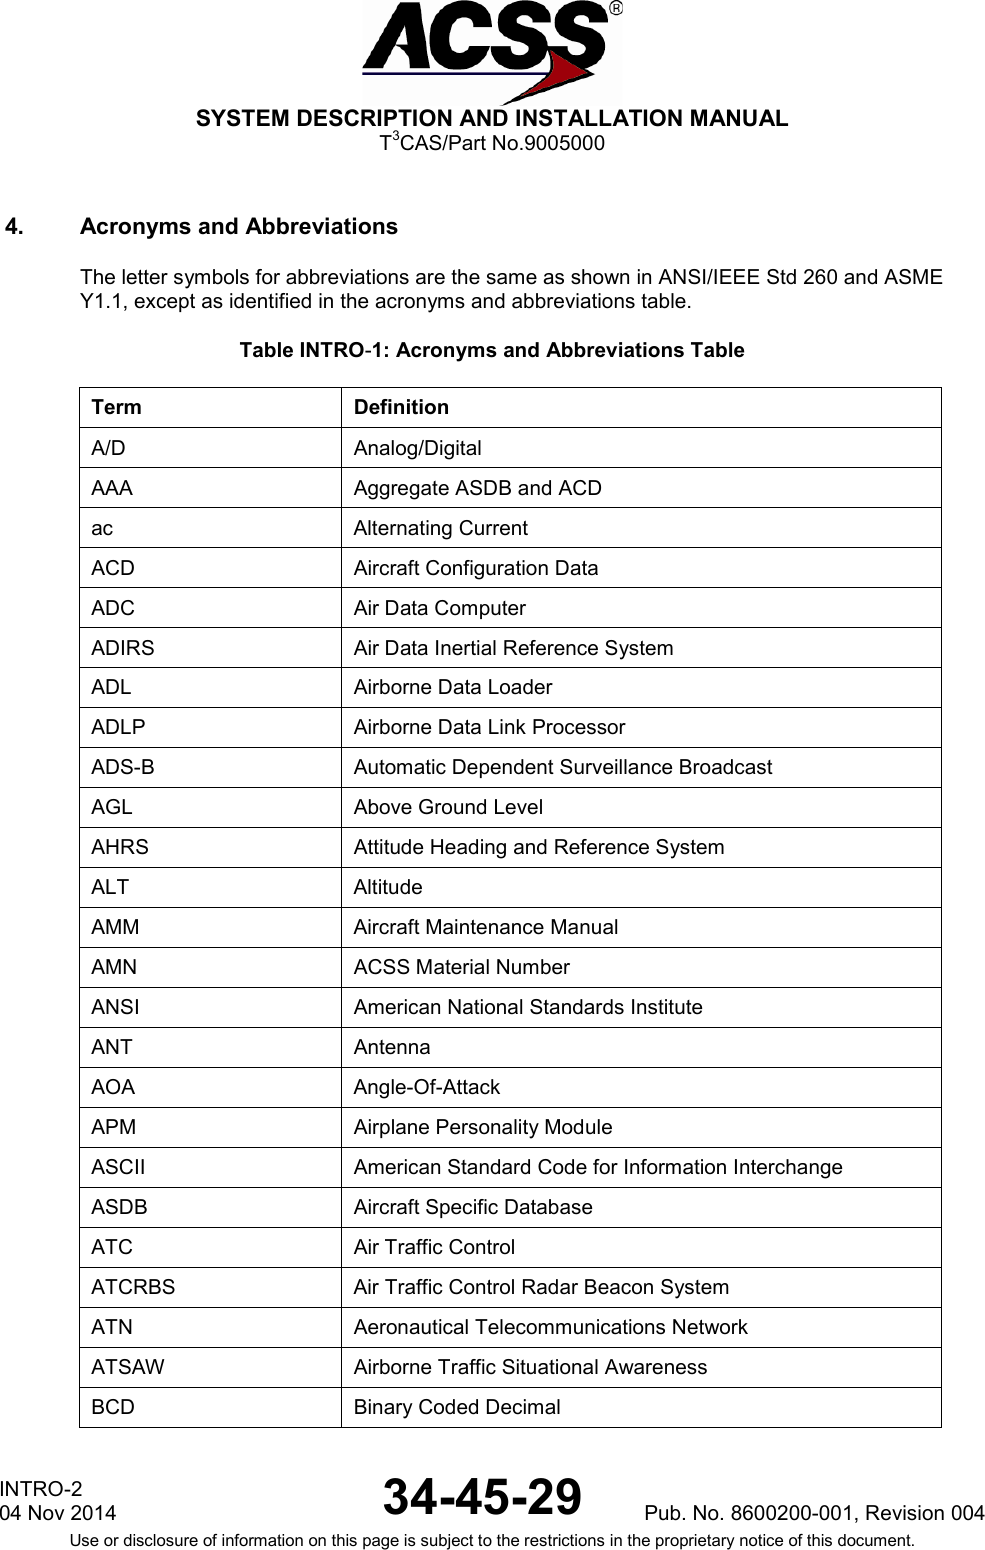  SYSTEM DESCRIPTION AND INSTALLATION MANUAL T3CAS/Part No.9005000 4. Acronyms and Abbreviations The letter symbols for abbreviations are the same as shown in ANSI/IEEE Std 260 and ASME Y1.1, except as identified in the acronyms and abbreviations table. Table INTRO-1: Acronyms and Abbreviations Table Term Definition A/D Analog/Digital AAA Aggregate ASDB and ACD ac Alternating Current ACD Aircraft Configuration Data ADC Air Data Computer ADIRS Air Data Inertial Reference System ADL Airborne Data Loader ADLP Airborne Data Link Processor ADS-B Automatic Dependent Surveillance Broadcast AGL Above Ground Level AHRS Attitude Heading and Reference System ALT Altitude AMM Aircraft Maintenance Manual AMN ACSS Material Number ANSI American National Standards Institute ANT Antenna AOA Angle-Of-Attack APM Airplane Personality Module ASCII American Standard Code for Information Interchange ASDB Aircraft Specific Database ATC Air Traffic Control ATCRBS Air Traffic Control Radar Beacon System ATN Aeronautical Telecommunications Network ATSAW Airborne Traffic Situational Awareness BCD Binary Coded Decimal INTRO-2 04 Nov 2014 34-45-29 Pub. No. 8600200-001, Revision 004  Use or disclosure of information on this page is subject to the restrictions in the proprietary notice of this document.   